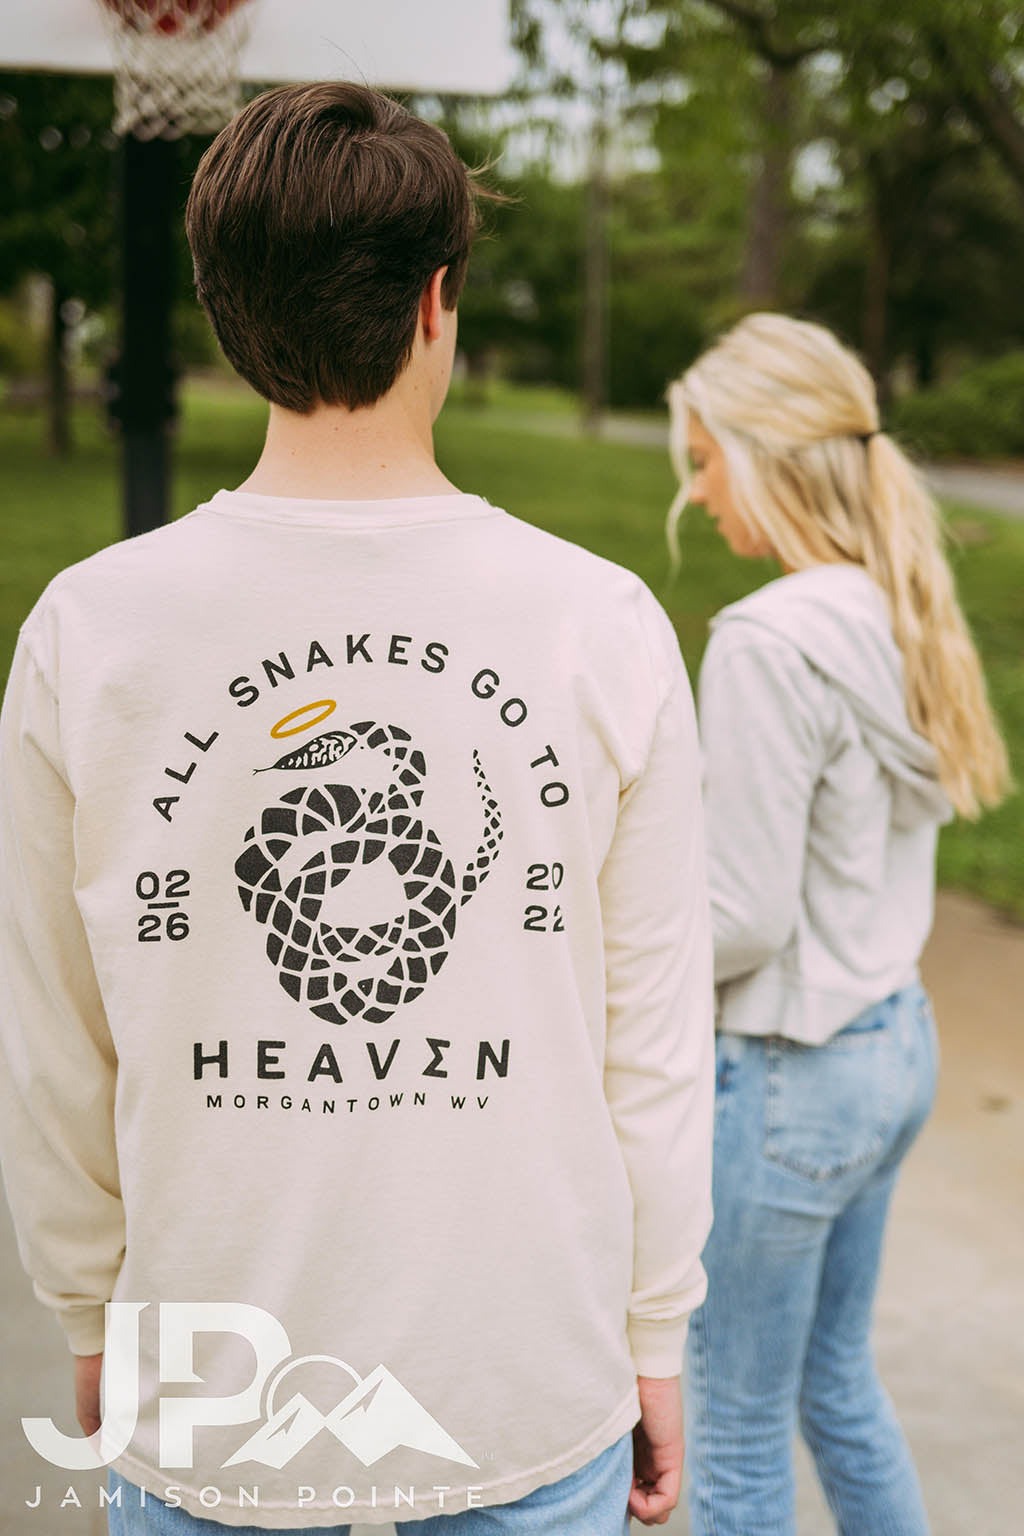 Sigma Nu All Snakes Go To Heaven Tee